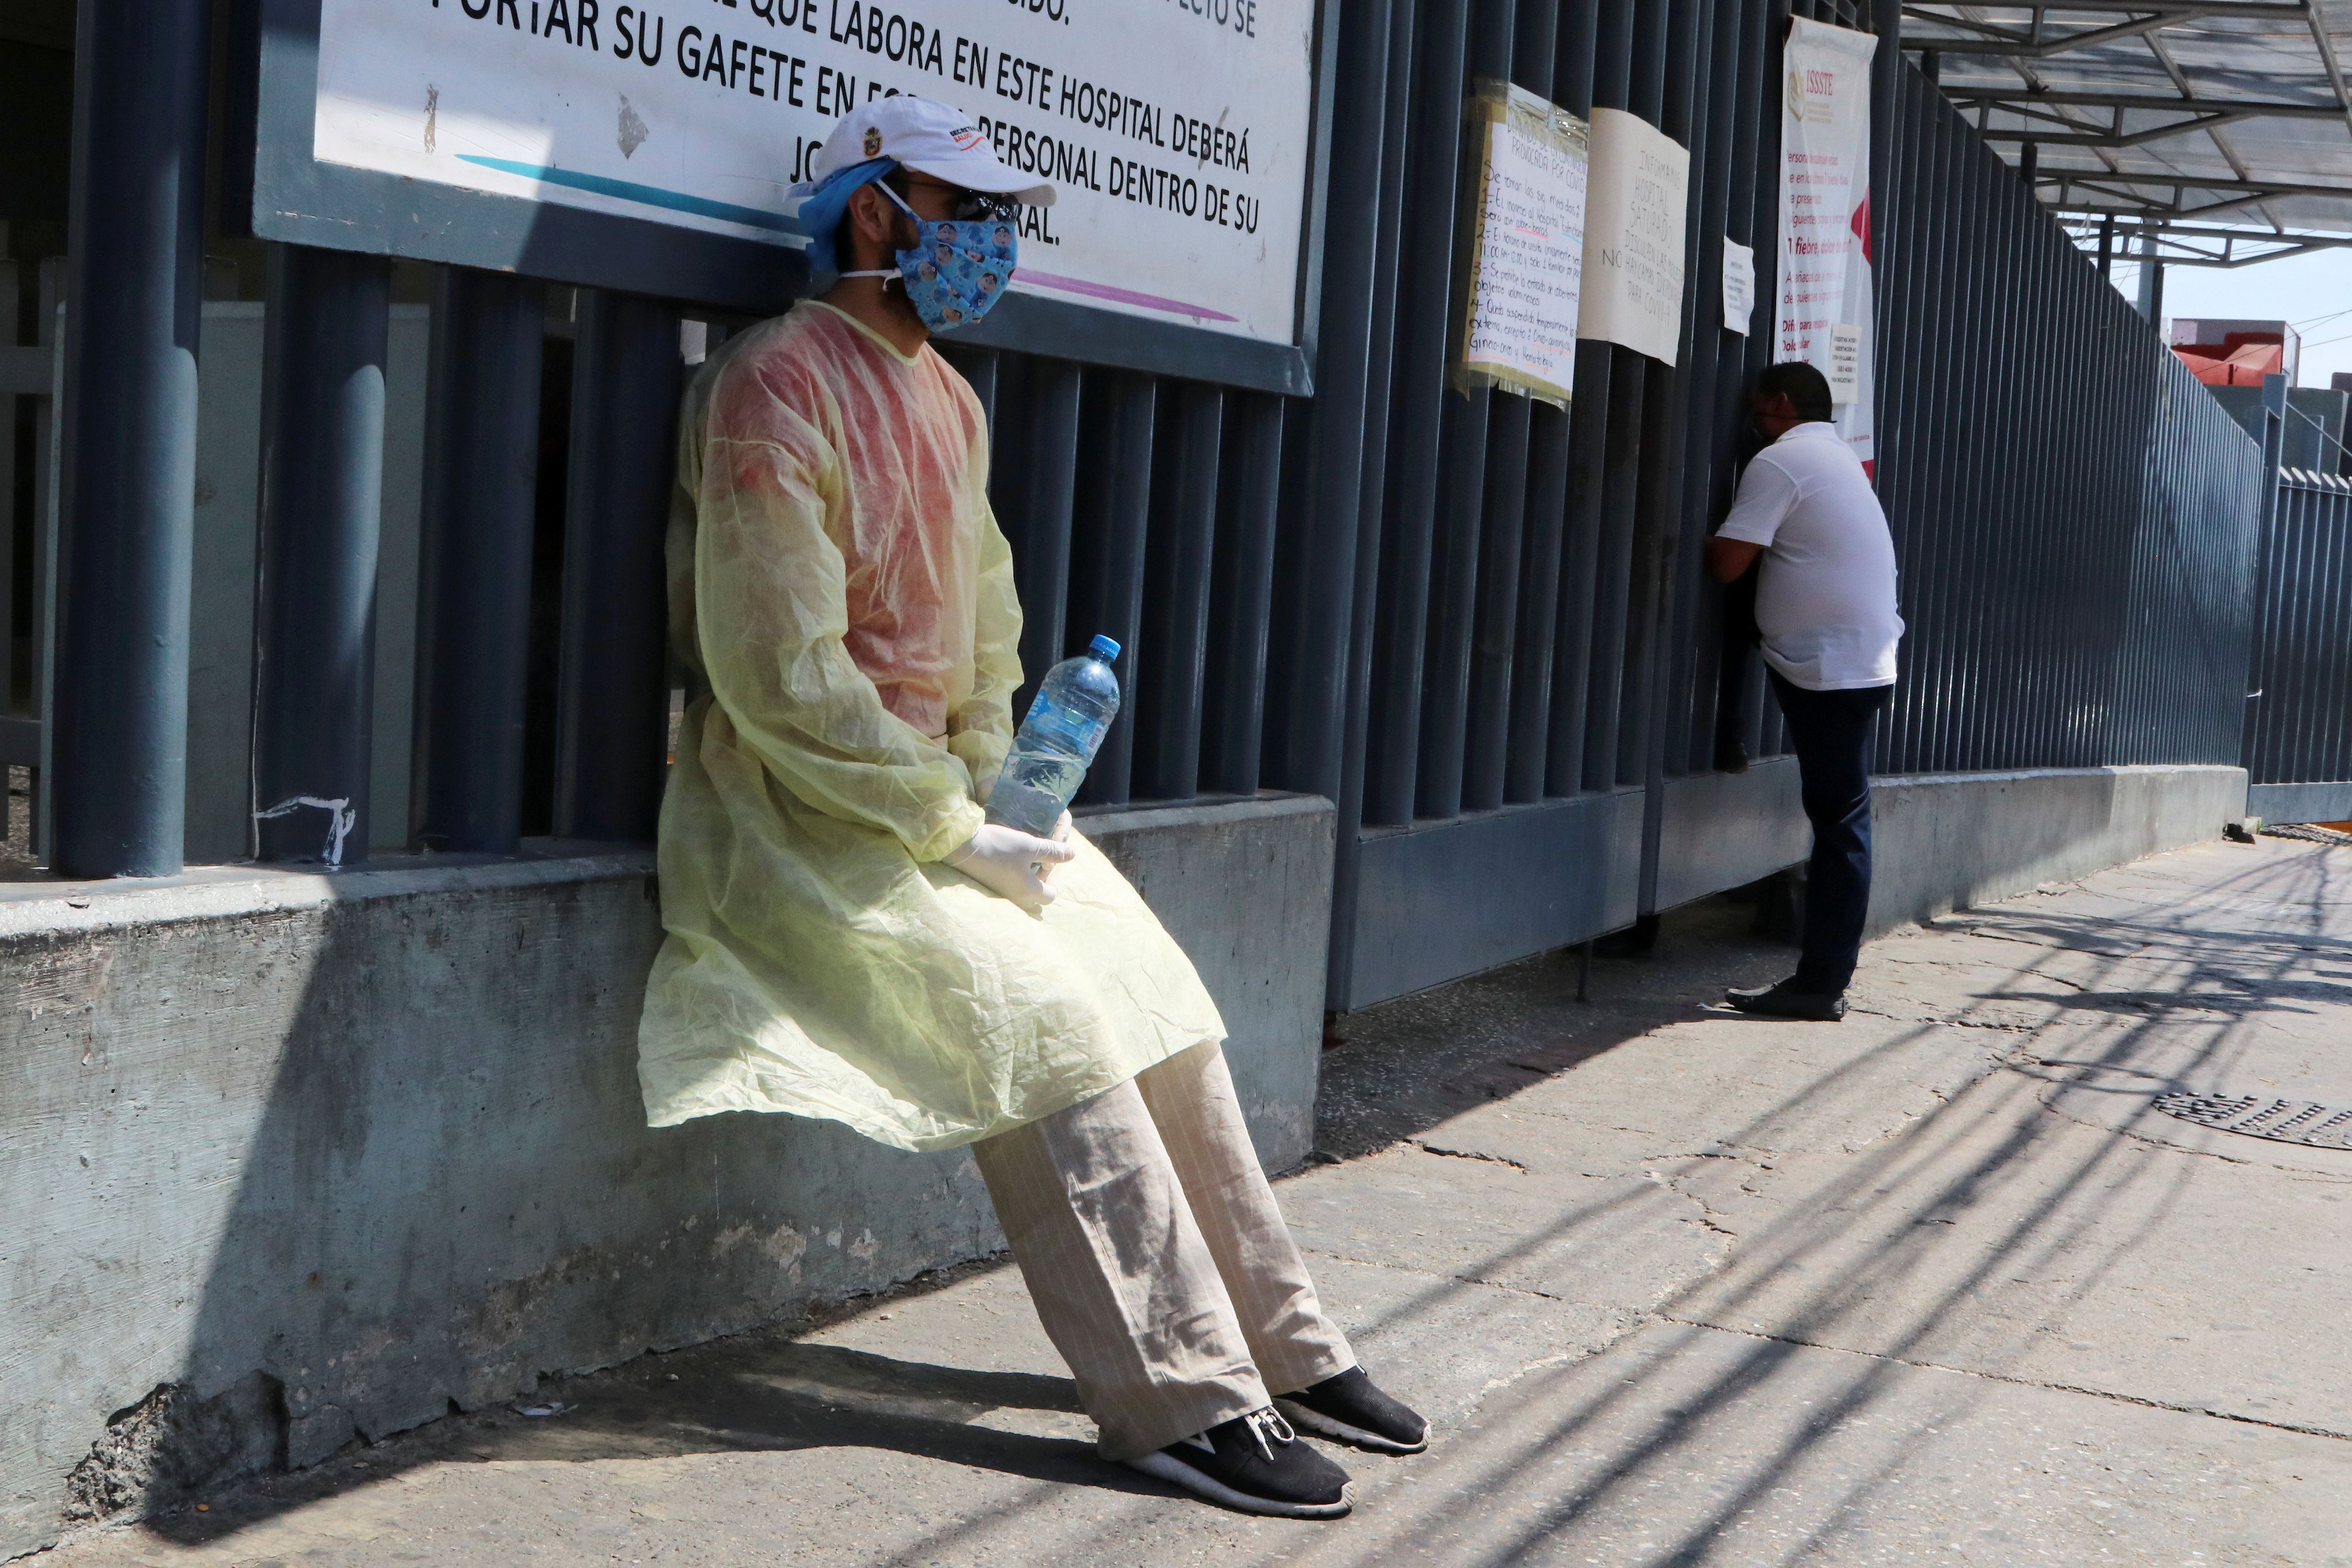 A medical staff member in protective gear takes a pause outside a hospital during the coronavirus disease (COVID-19) outbreak, in Acapulco, Mexico May 26, 2020. Picture taken May 26, 2020. REUTERS/Javier Verdin